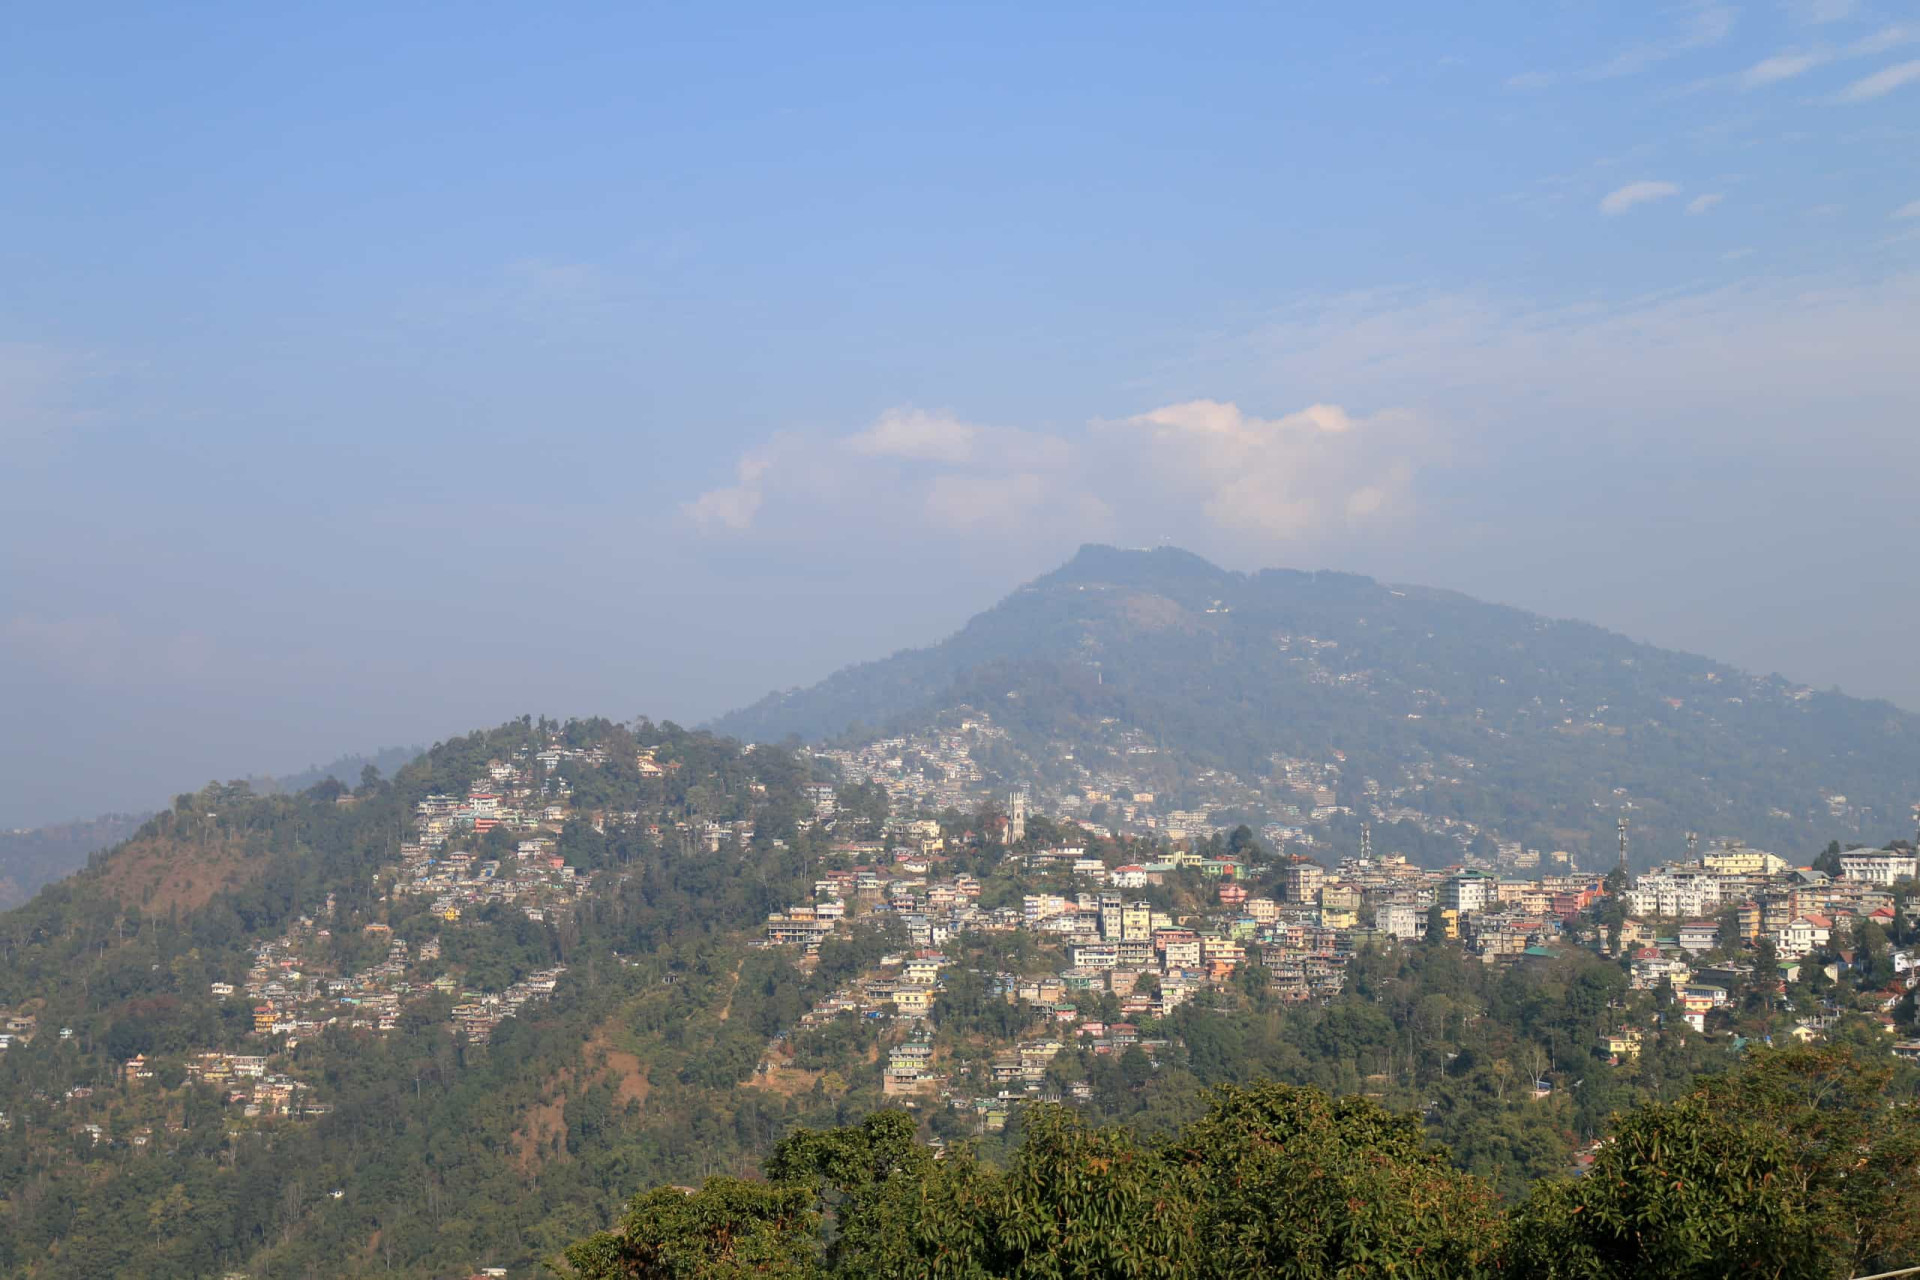 <p>Known for housing ancient monasteries as well as Catholic missions, Kalimpong in the Indian state of West Bengal is a modest hill station that sits easy between two landmark hills, Durpin and Deolo.</p> <p>Sources: (Hill Stations in India) (Chopta Tourism) (Auli)</p> <p>See also: <a href="https://www.starsinsider.com/travel/128096/discover-india-a-country-rich-in-ancient-traditions-and-culture">Discover India: a country rich in ancient traditions and culture</a></p><p>You may also like:<a href="https://www.starsinsider.com/n/477683?utm_source=msn.com&utm_medium=display&utm_campaign=referral_description&utm_content=470081v2en-en"> The key traits of someone with a calming presence</a></p>